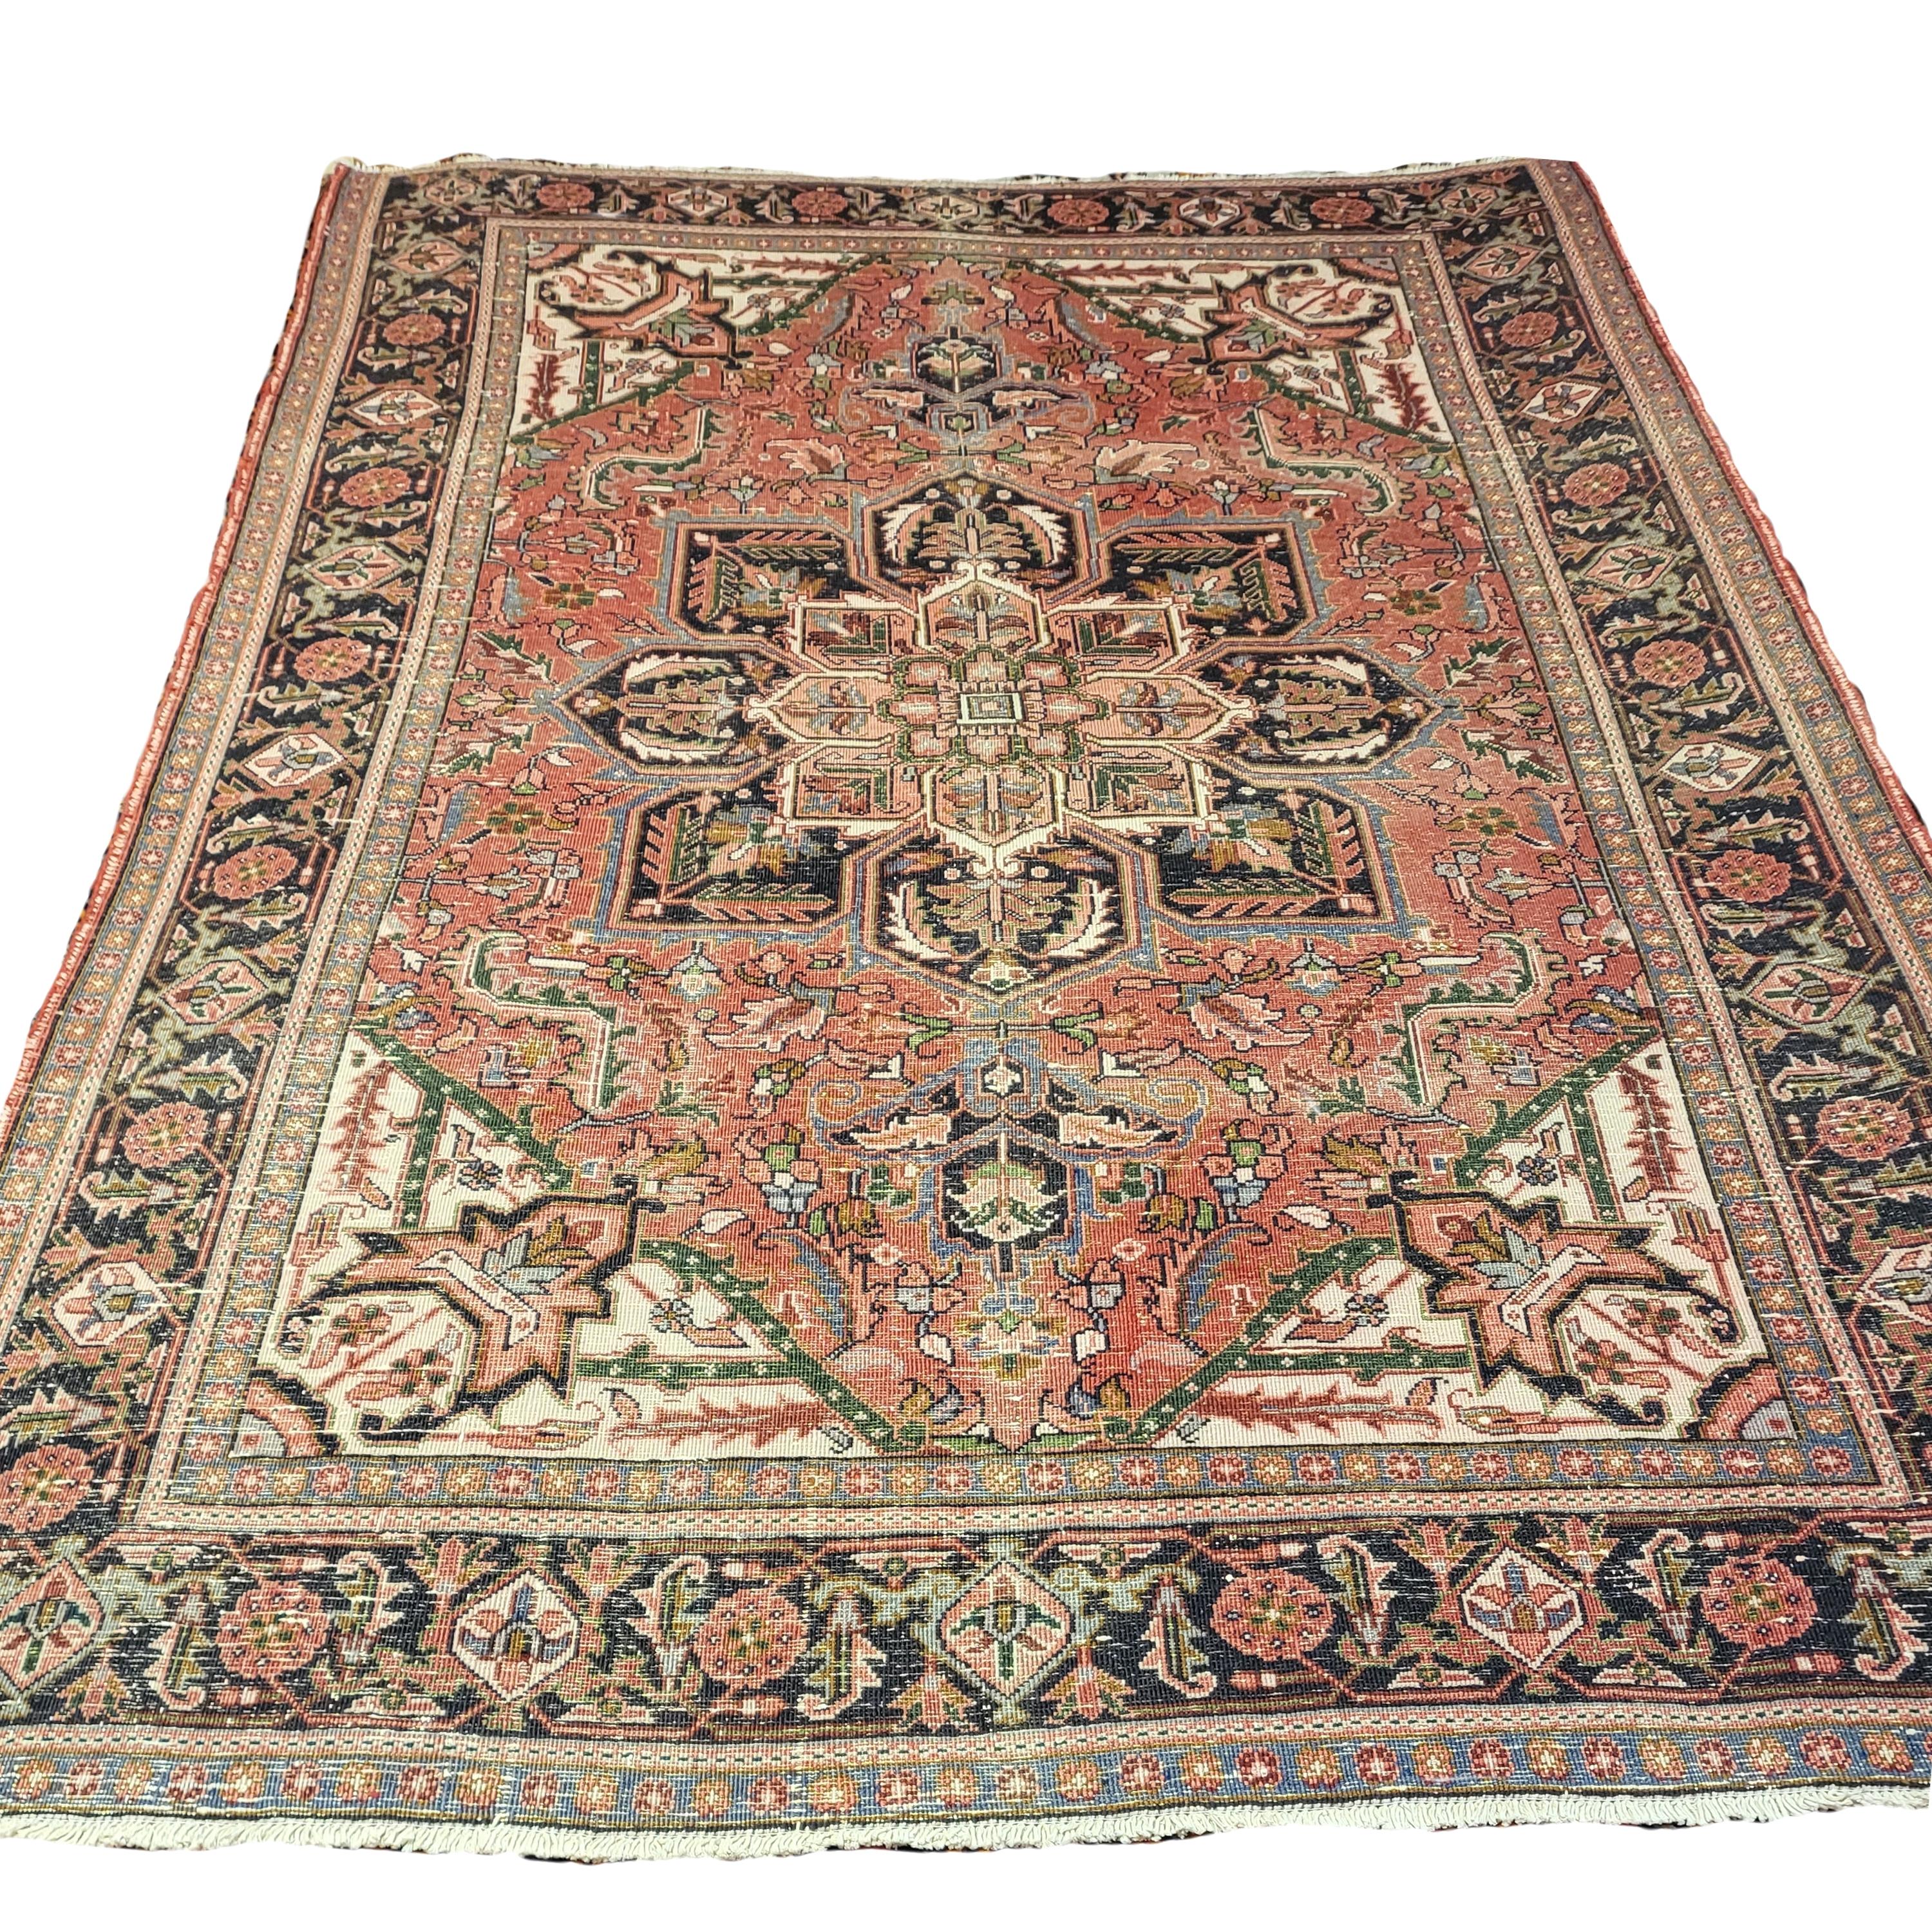 Gorgeous Mid 20th Century Heriz

7' 9 x 11'

Beautiful geometric / floral style Serapi rug, that was handwoven by the Ahar tribe of Heriz. Like many Northwestern Persian rugs, this type of Heriz is incredibly thick, heavy and sturdy. These geometric